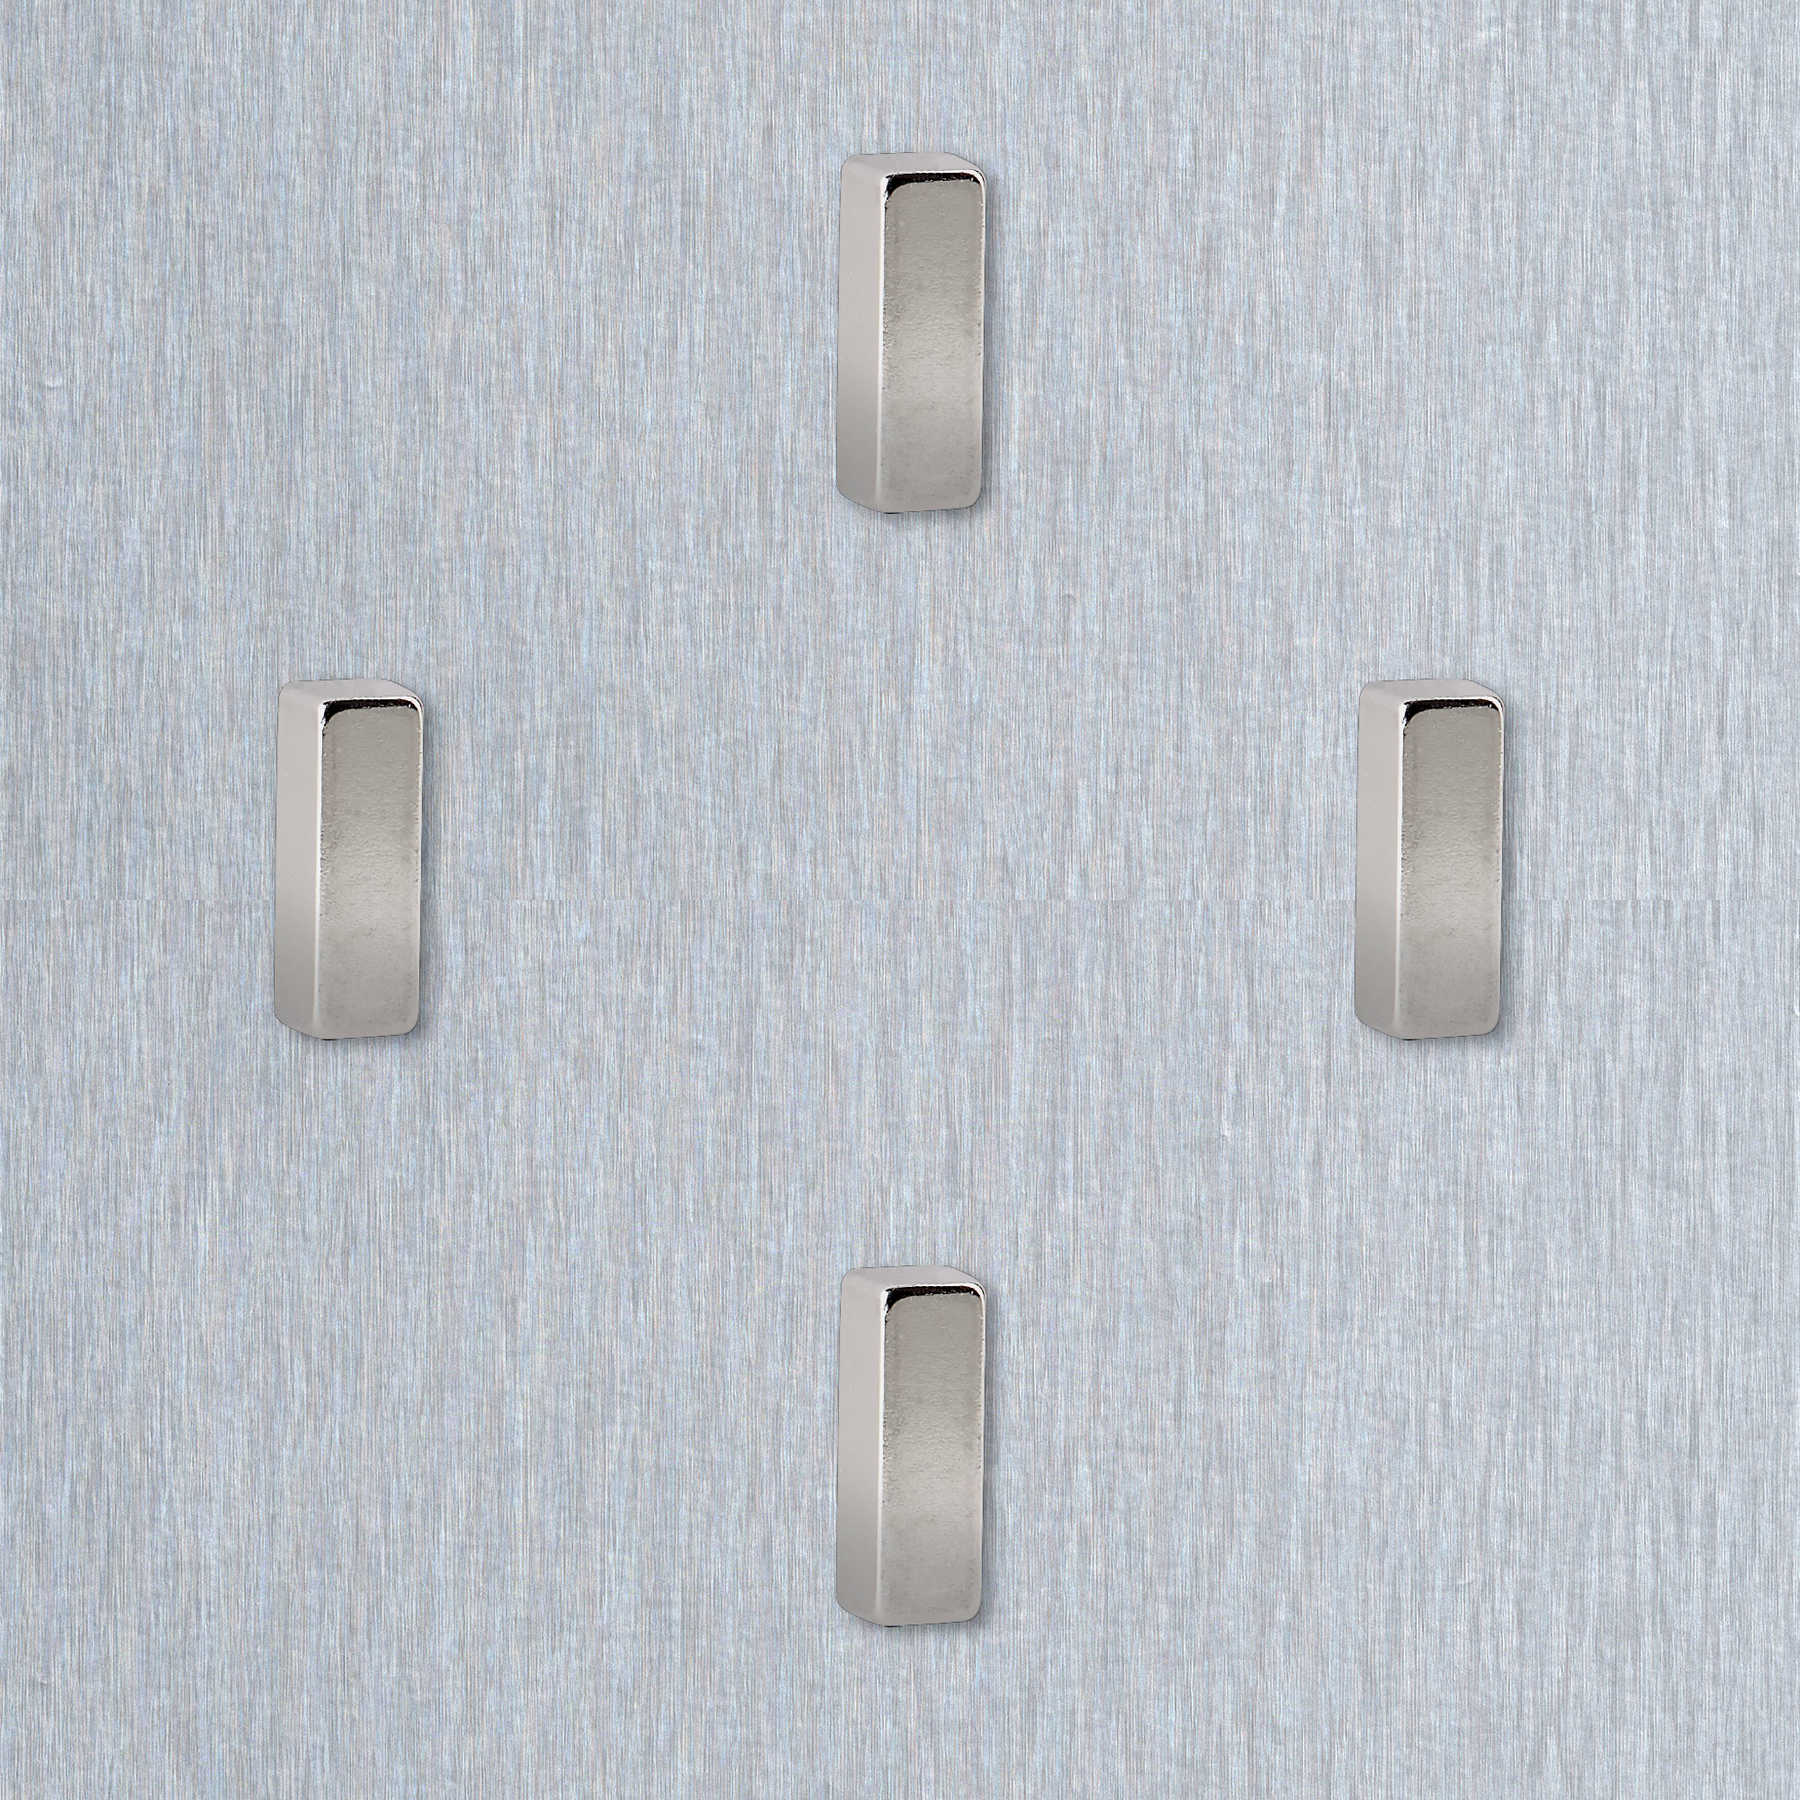             Set of 4 magnets in 6 x 18 x 6 mm
        